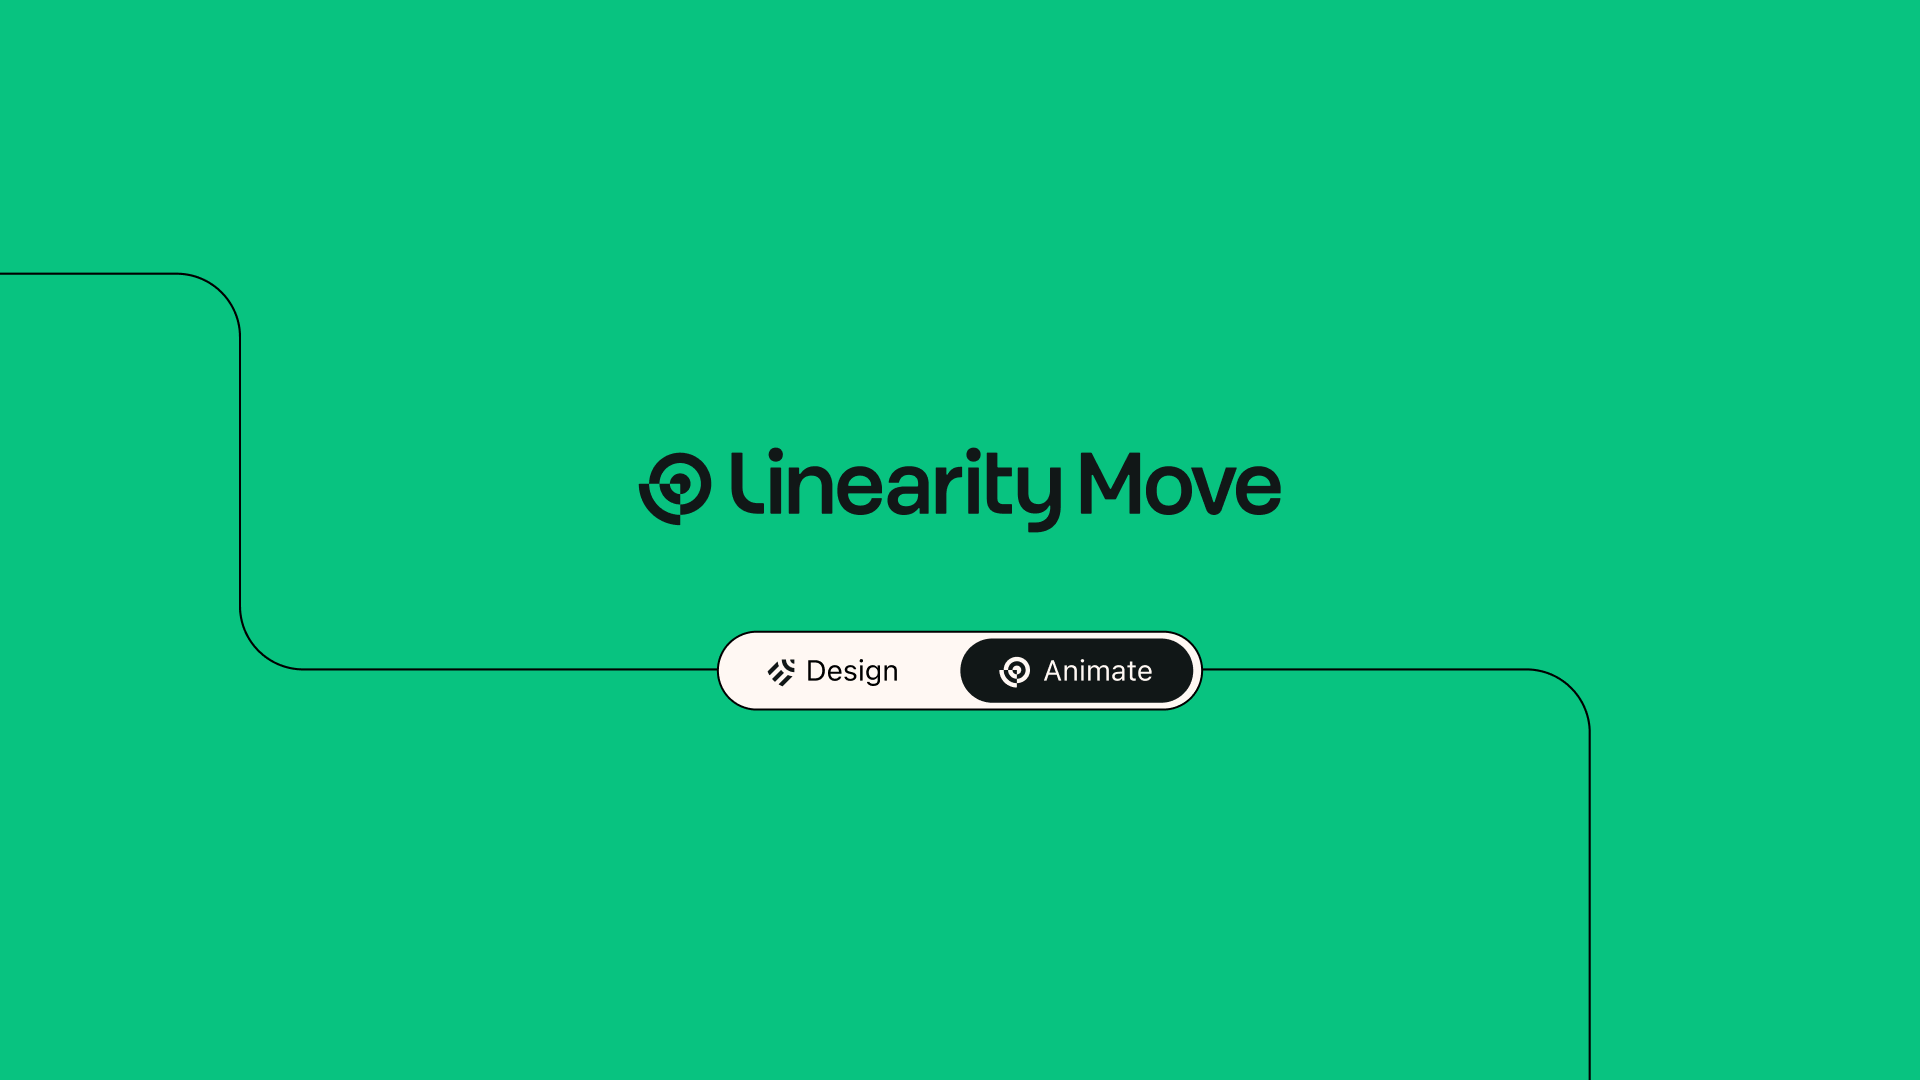 Linearity Move: the one animation platform your team needs | Linearity